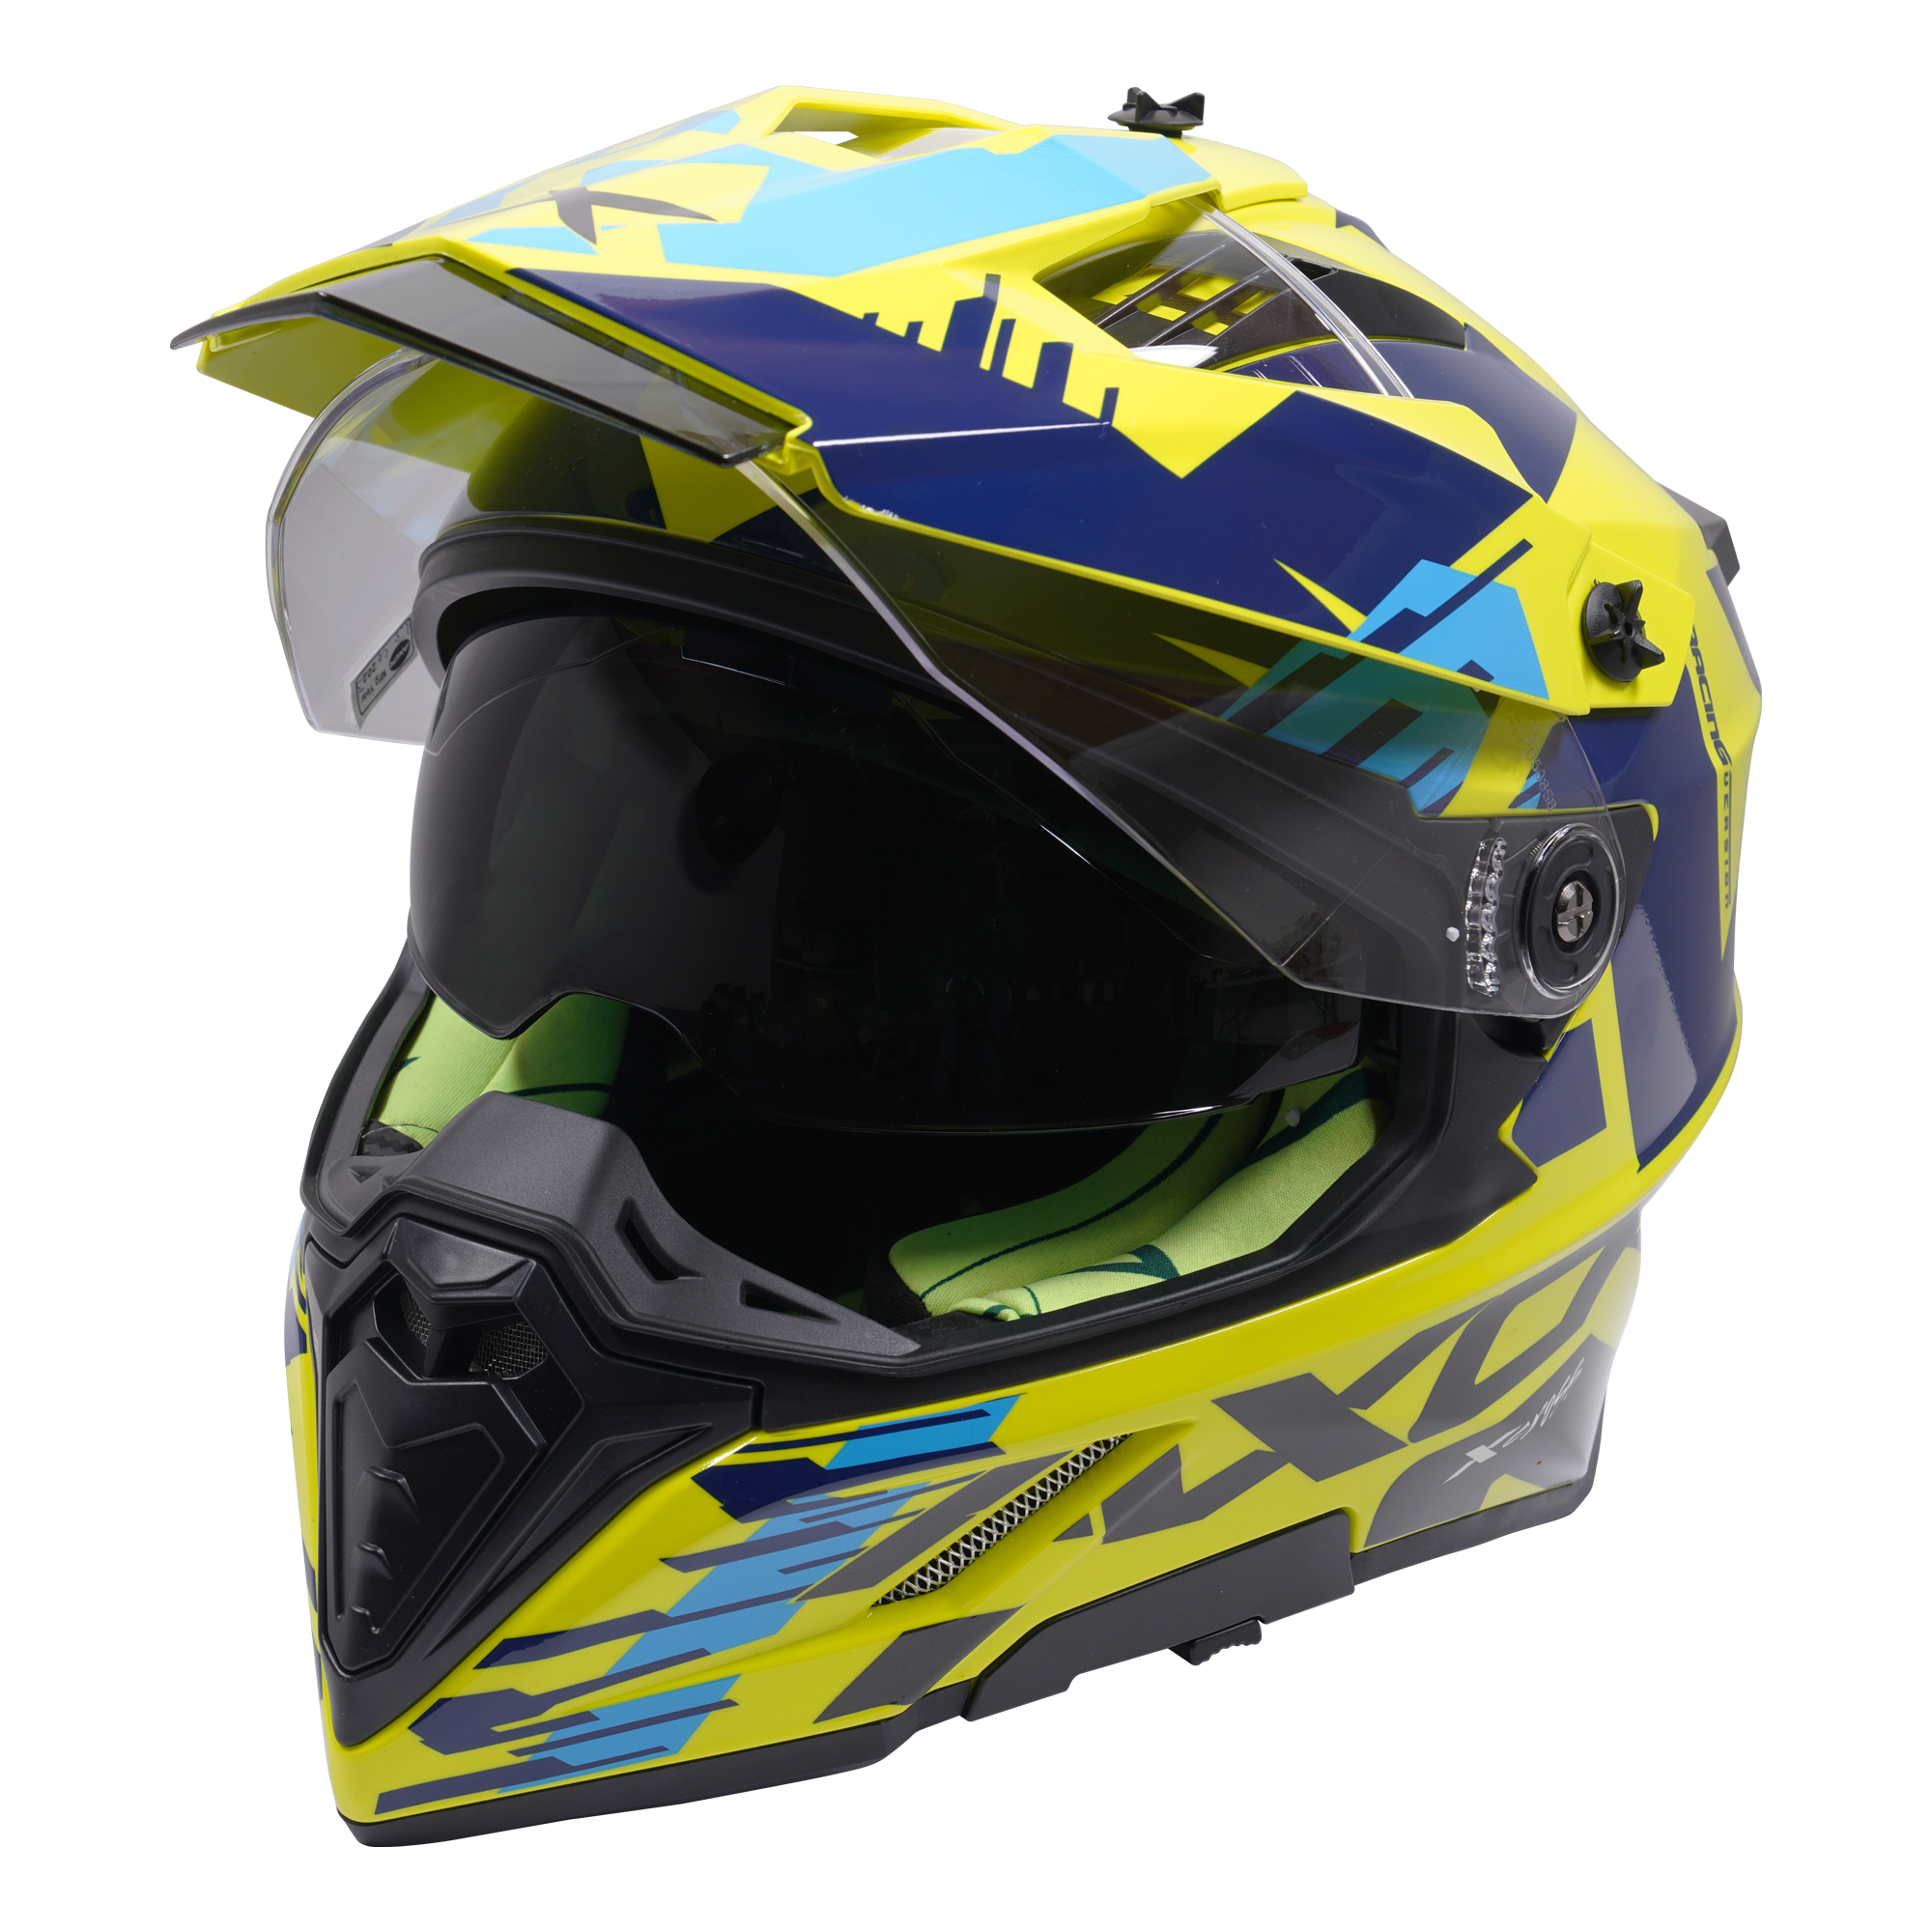 Load image into Gallery viewer, Axor Helmet X-Cross Adventure - Blue/Yellow Graphic
